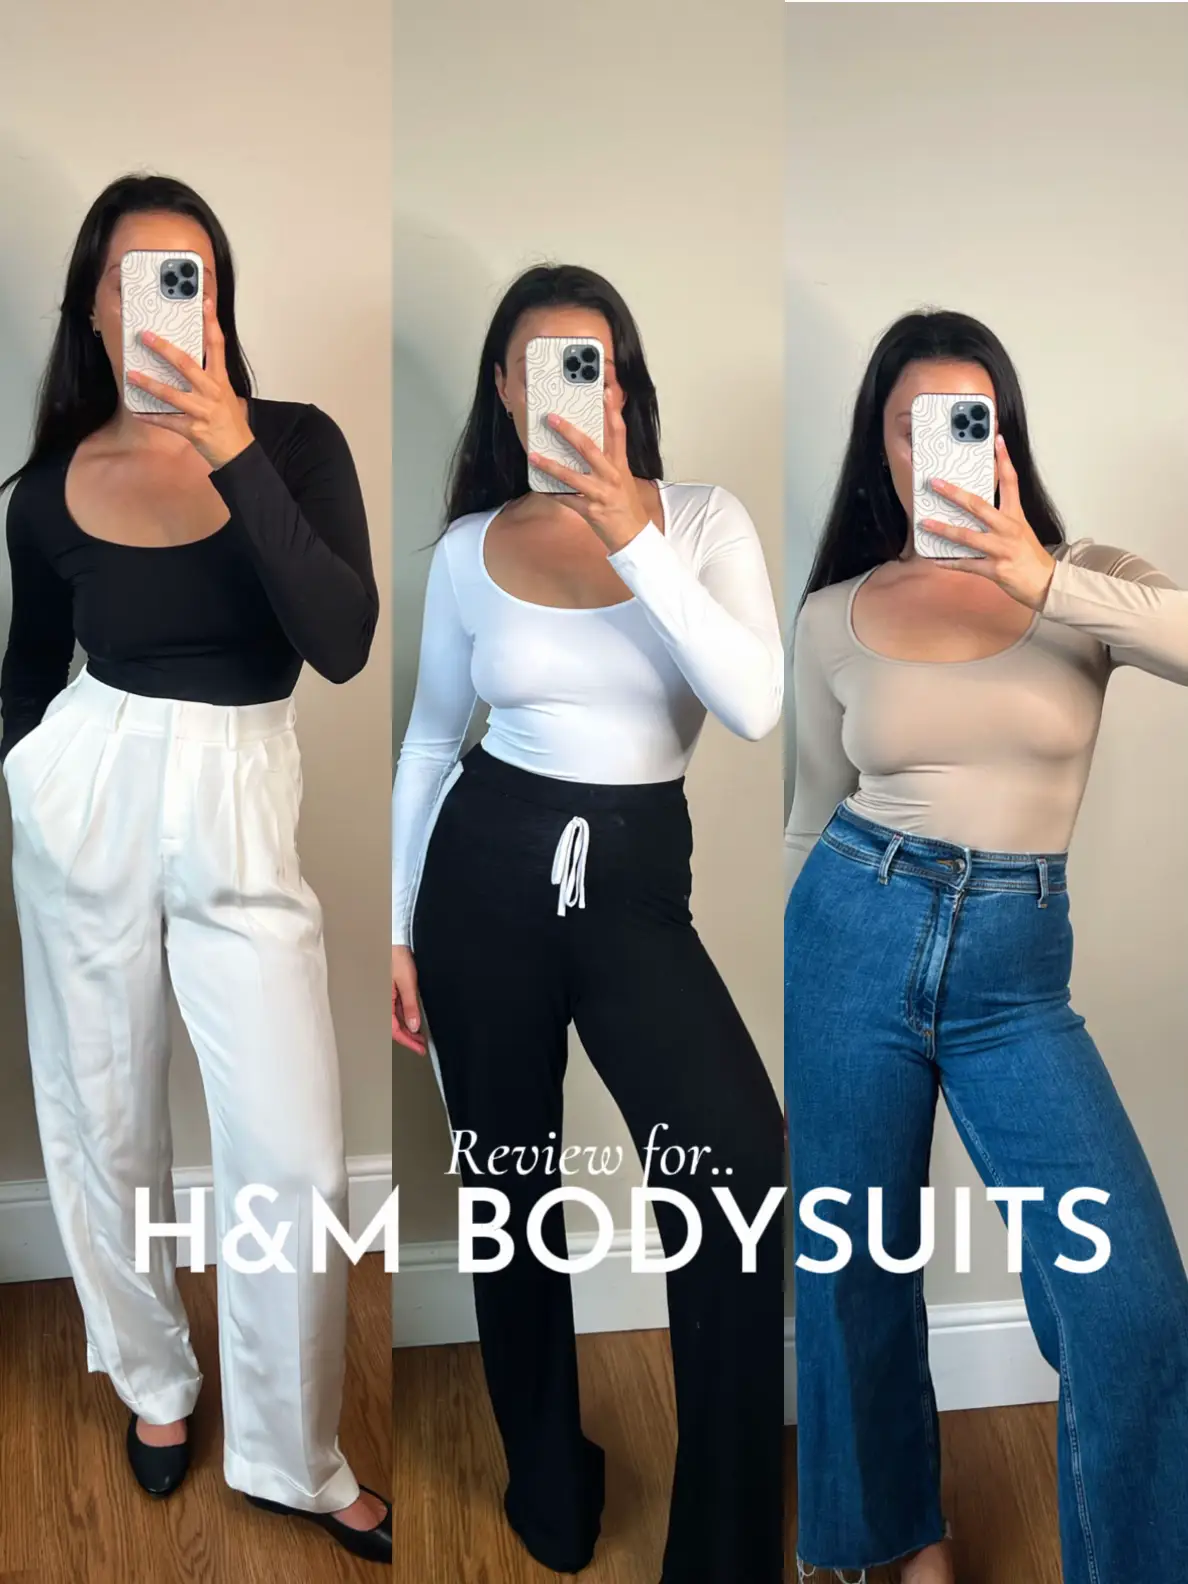 H&M BODYSUITS - honest review🍋✨, Gallery posted by liv.m.jackson